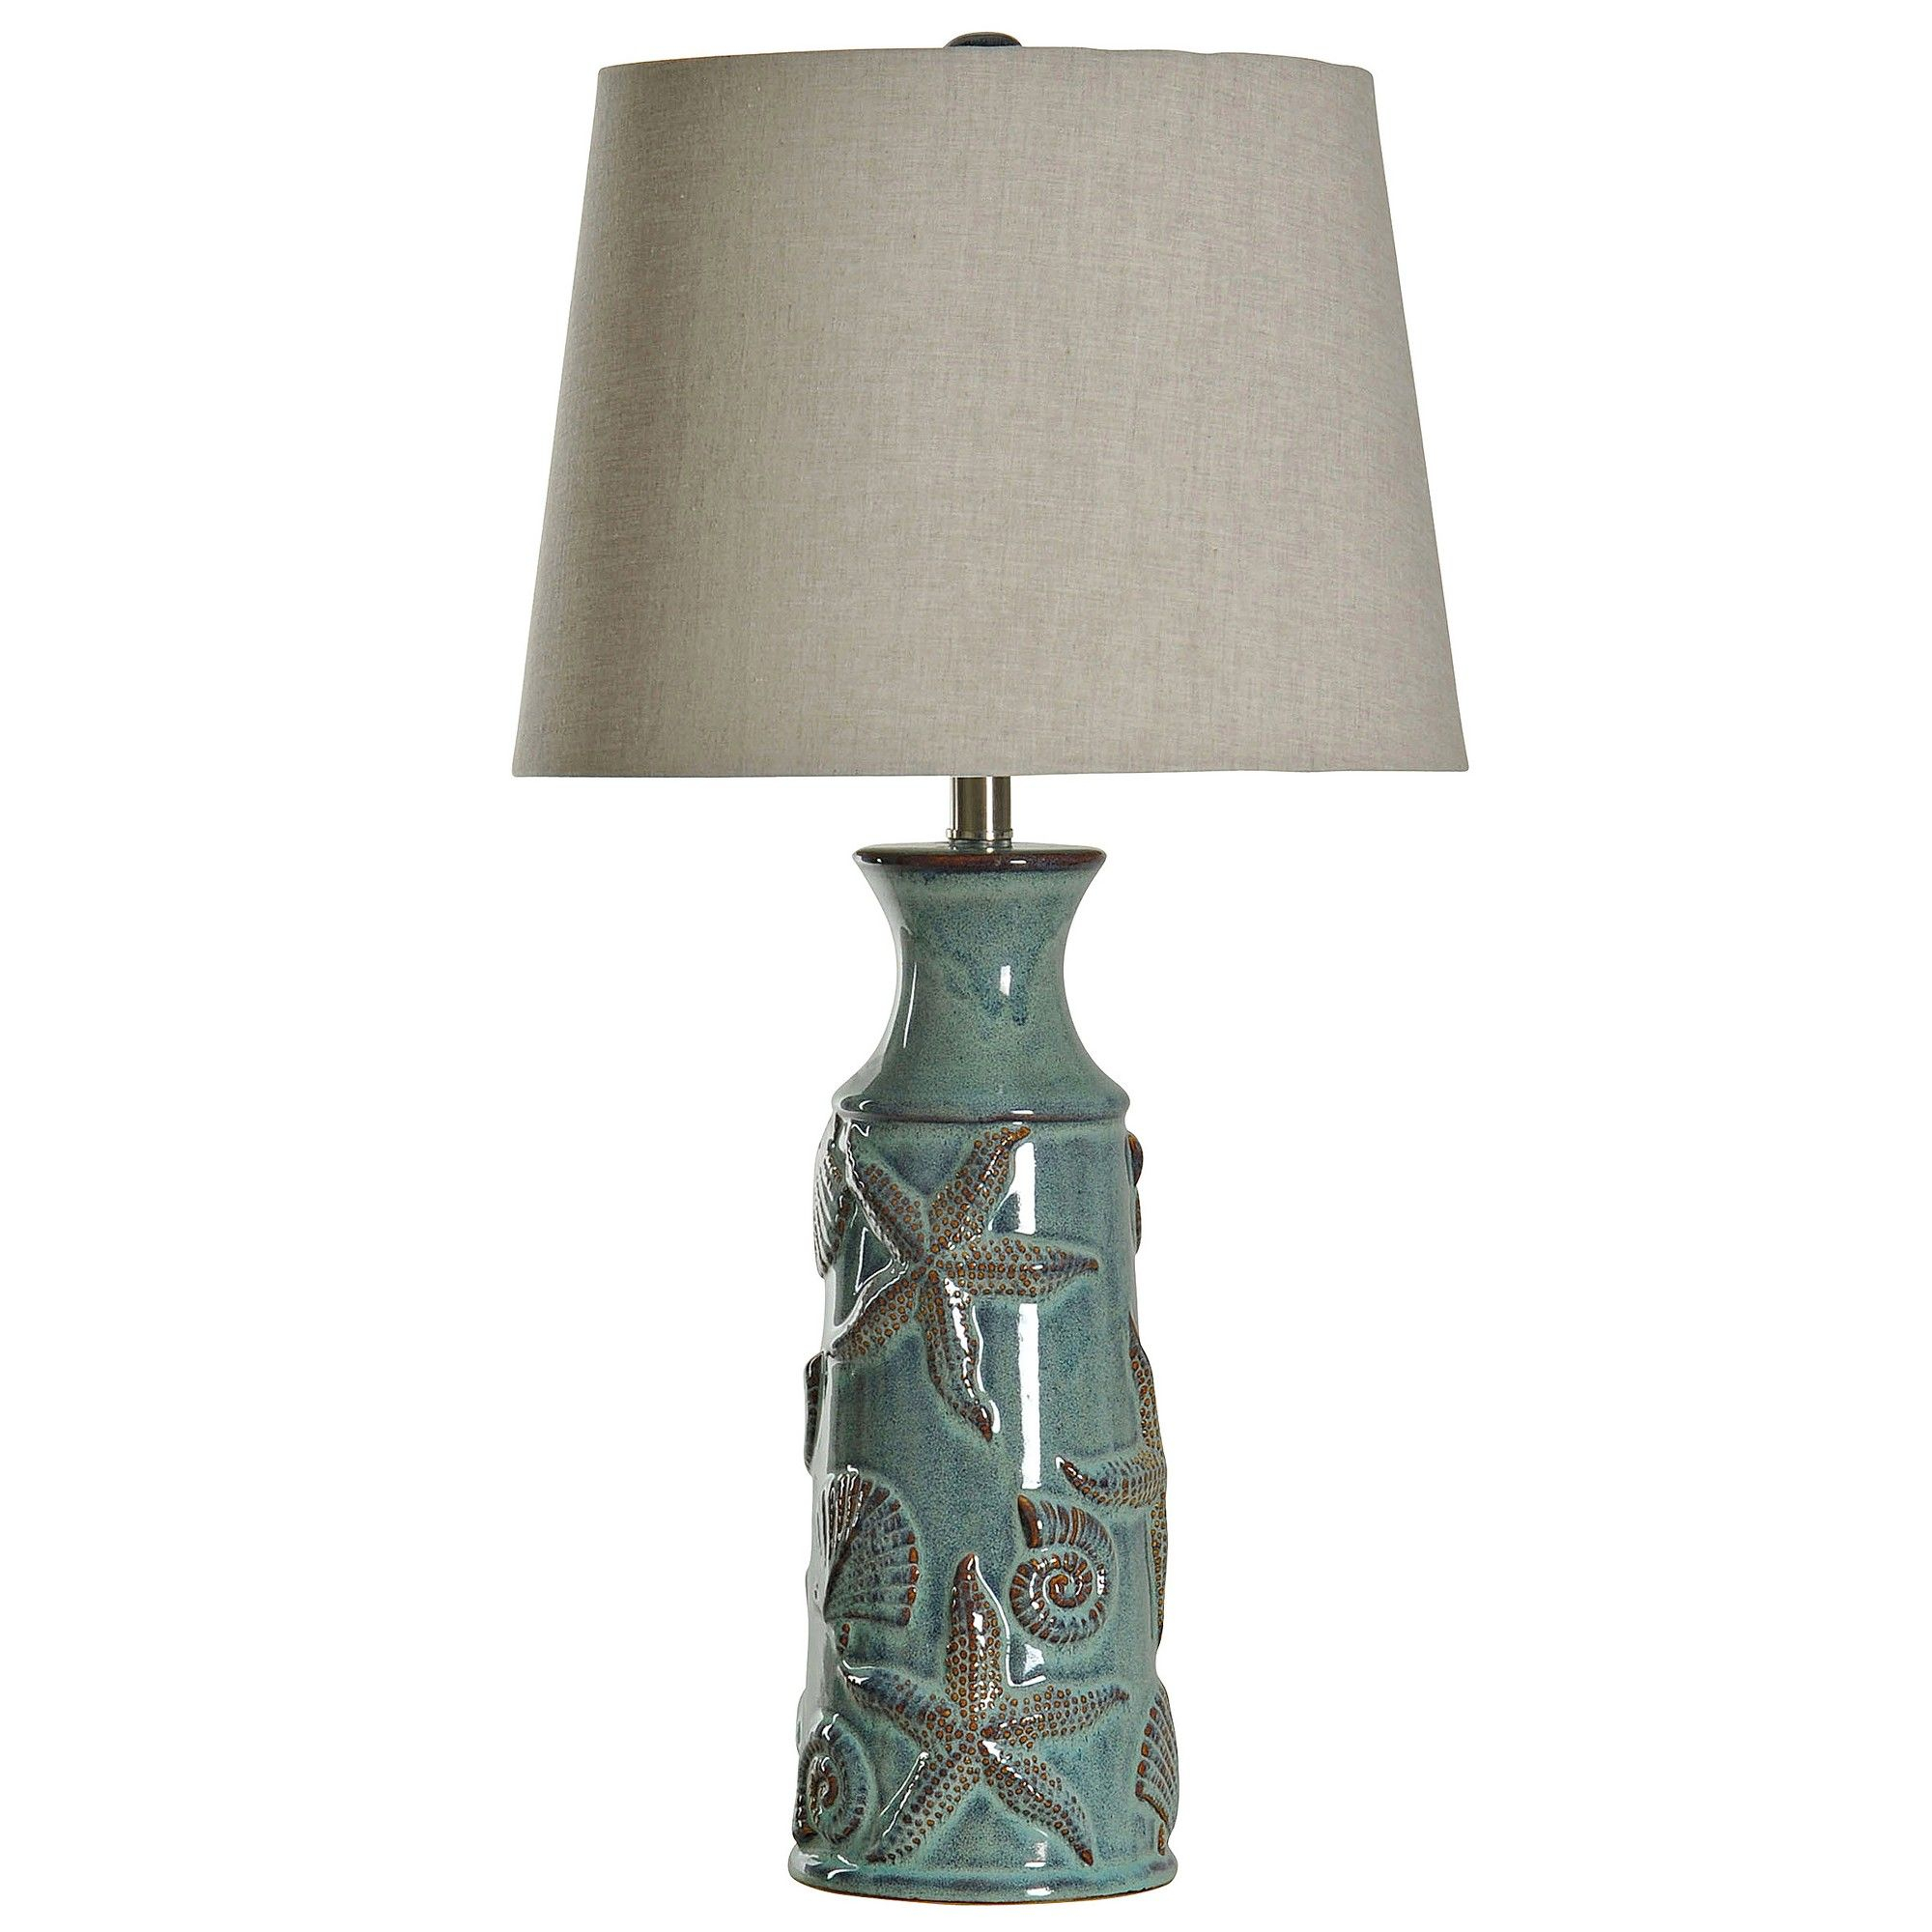 Blue Bay Nautical Ceramic Table Lamp With Seashell Design intended for proportions 2000 X 2000